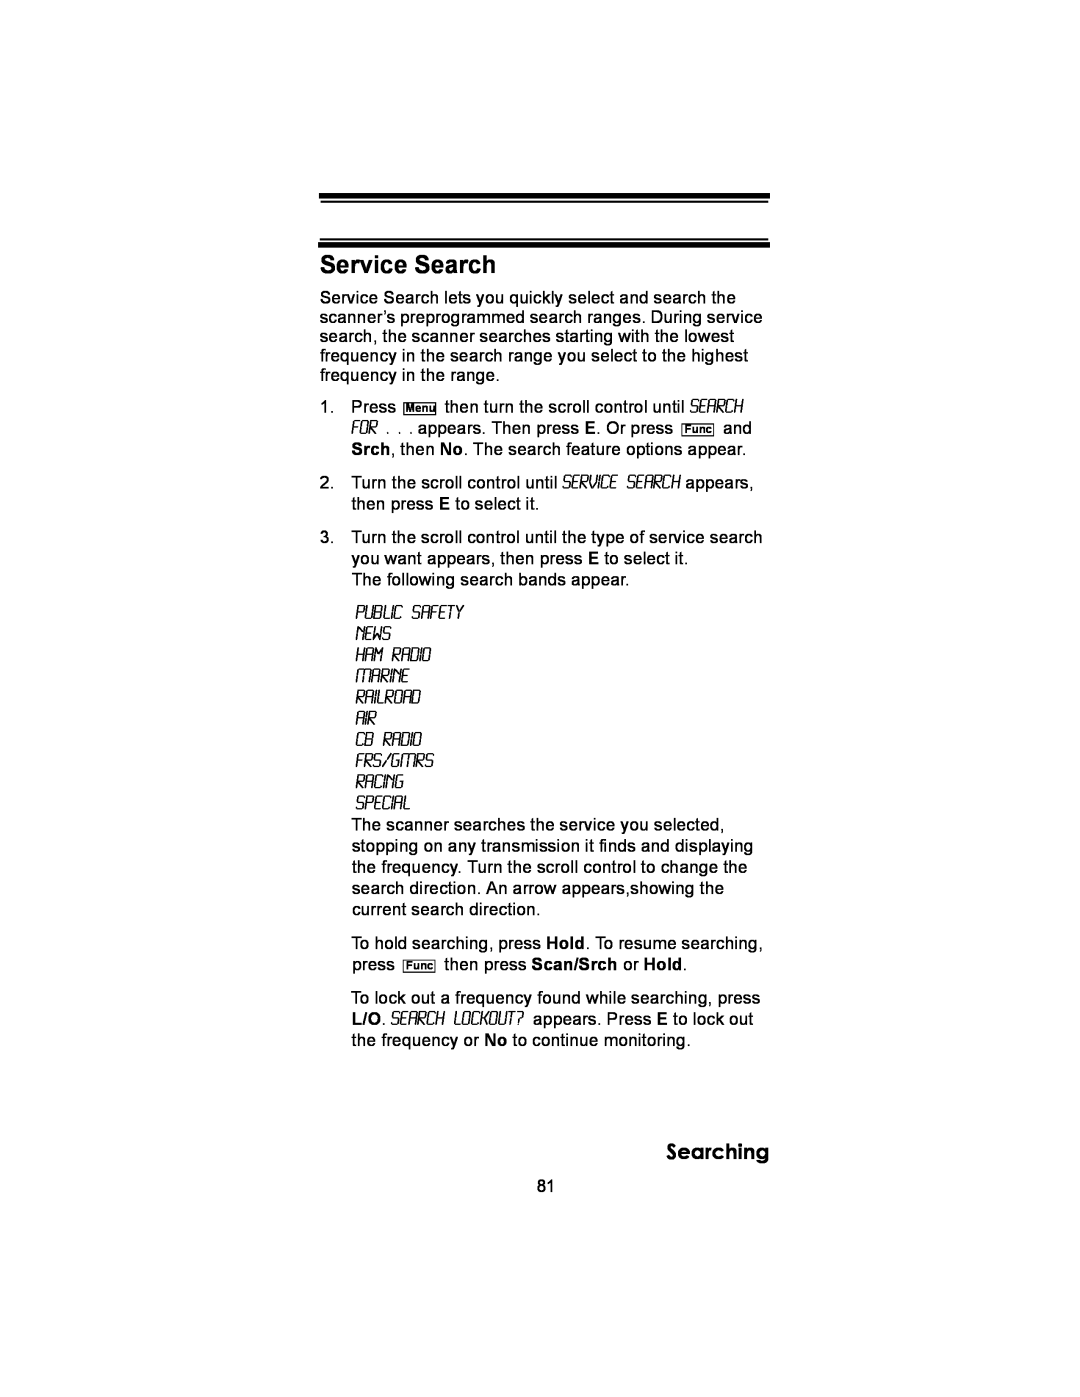 Uniden BC246T owner manual Service Search, Searching 